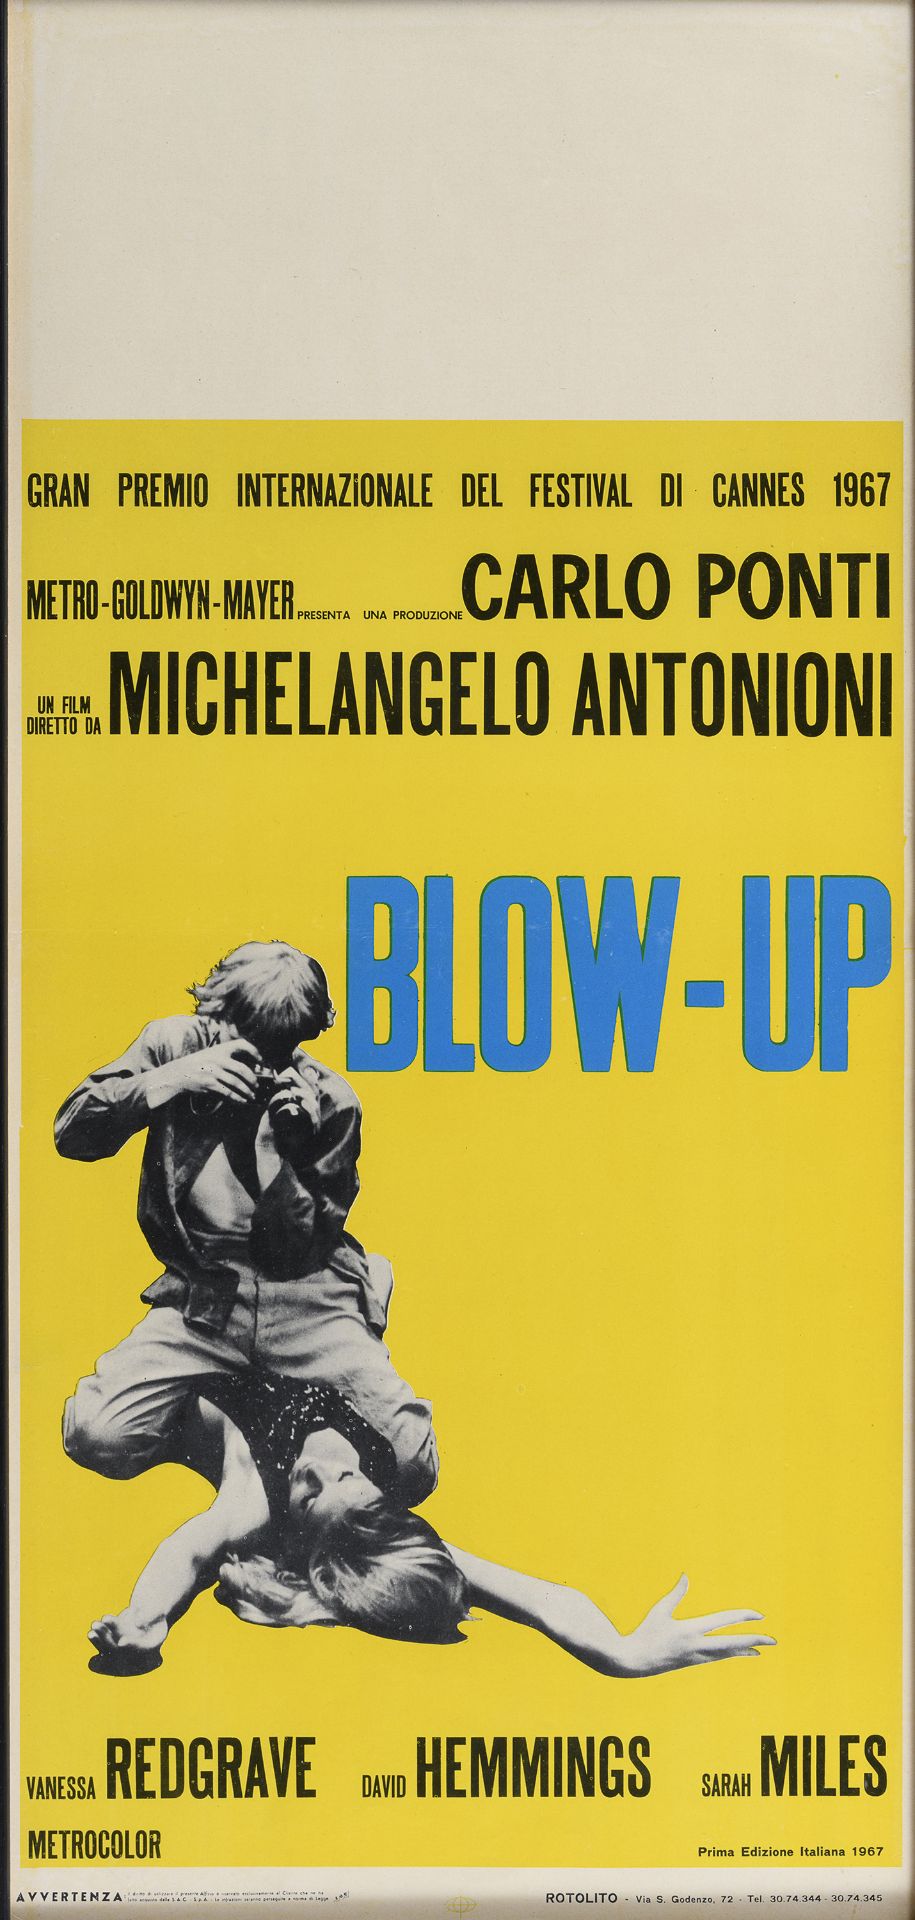 ORIGINAL POSTER OF THE FILM BLOW-UP 1967